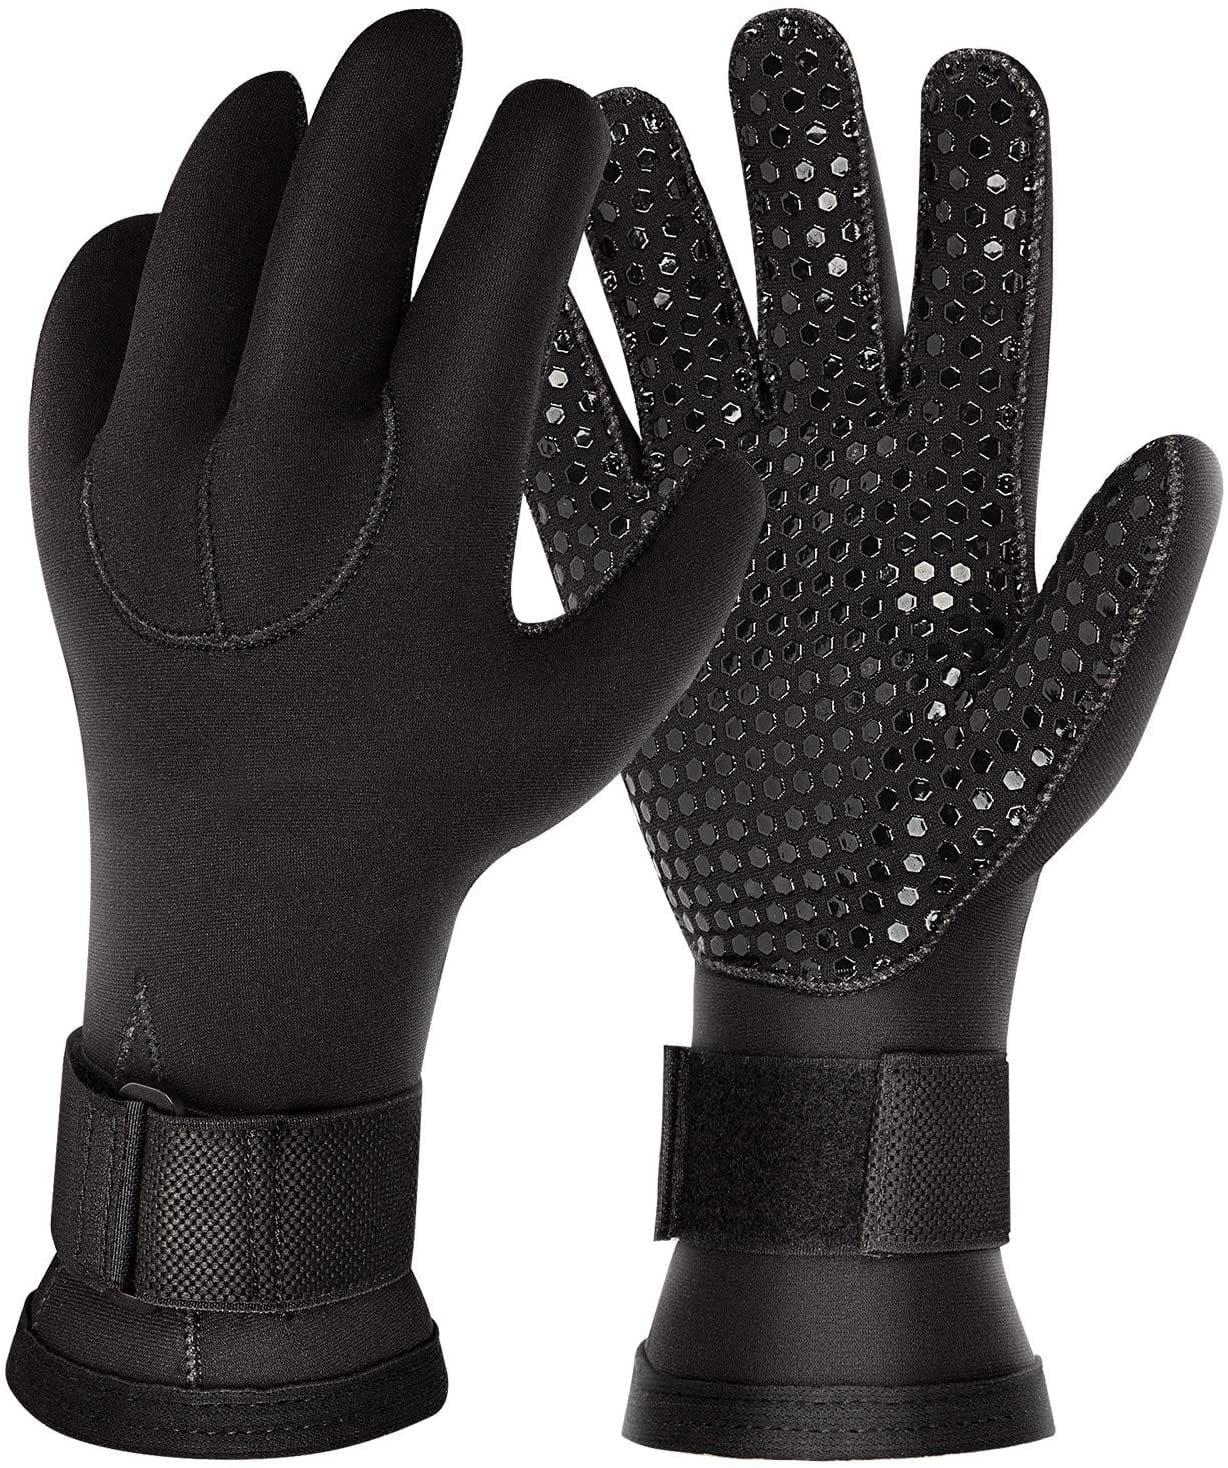 3MM Anti Scratch Wetsuit Gloves Diving Surfing Snorkeling Kayaking Cold-proof 